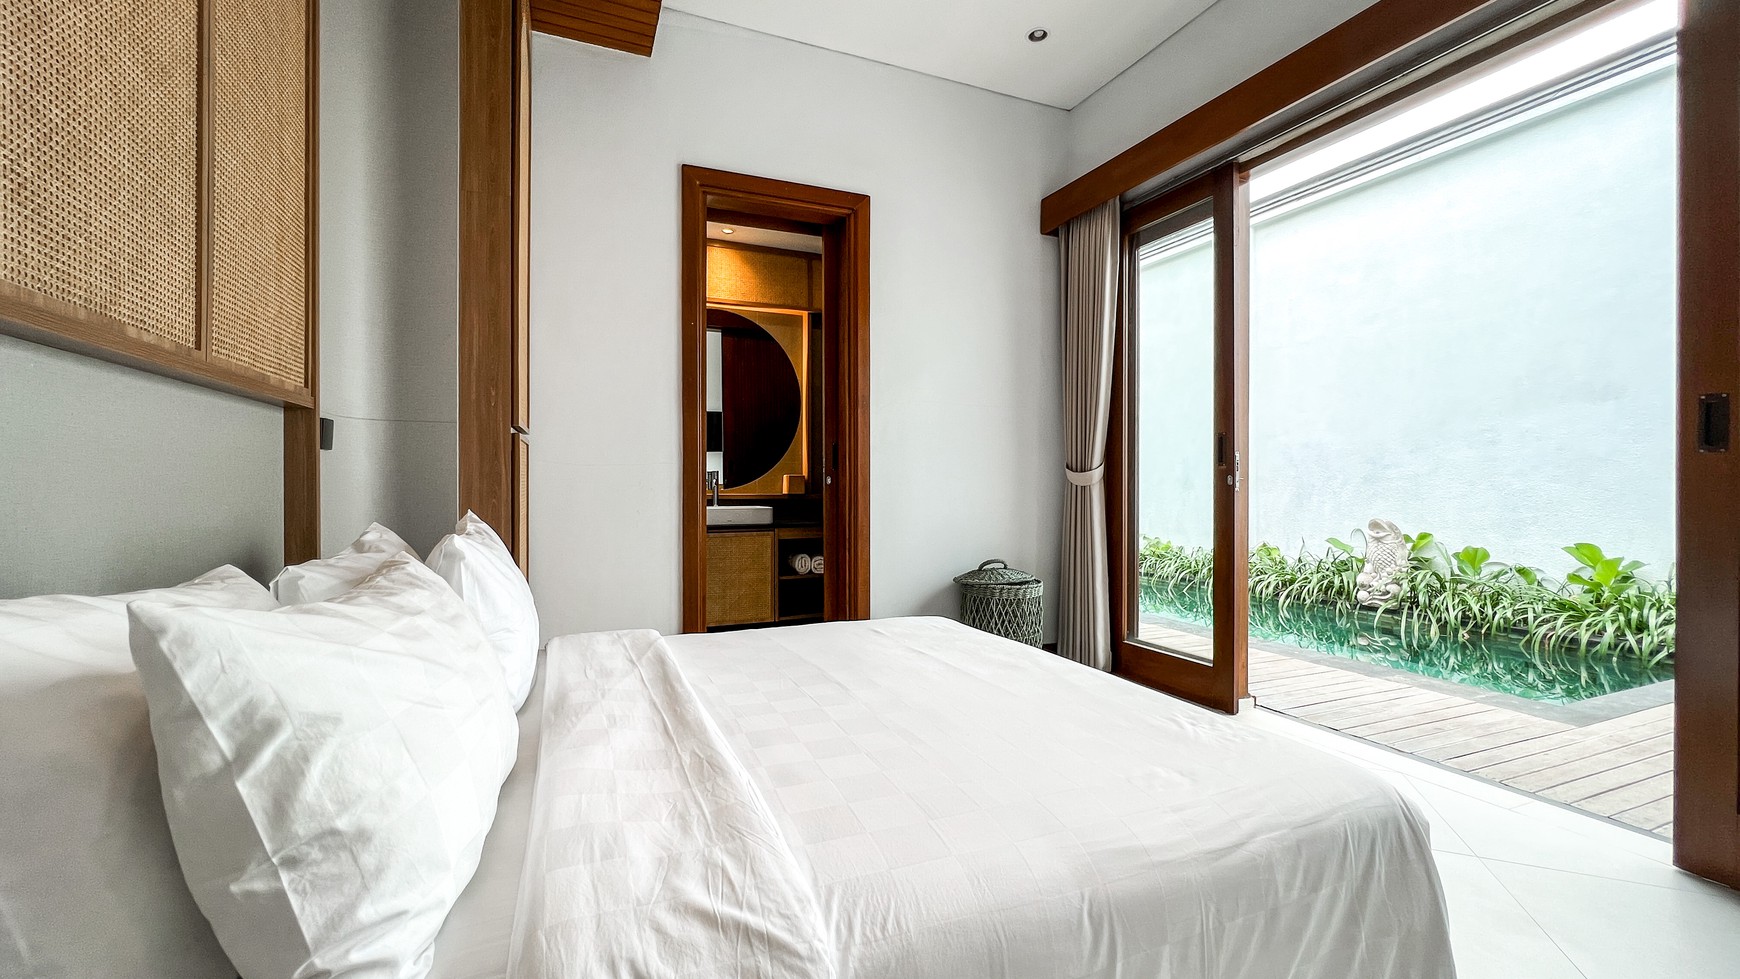 THE BEST INVESTMENT IN THE HEART OF CANGGU